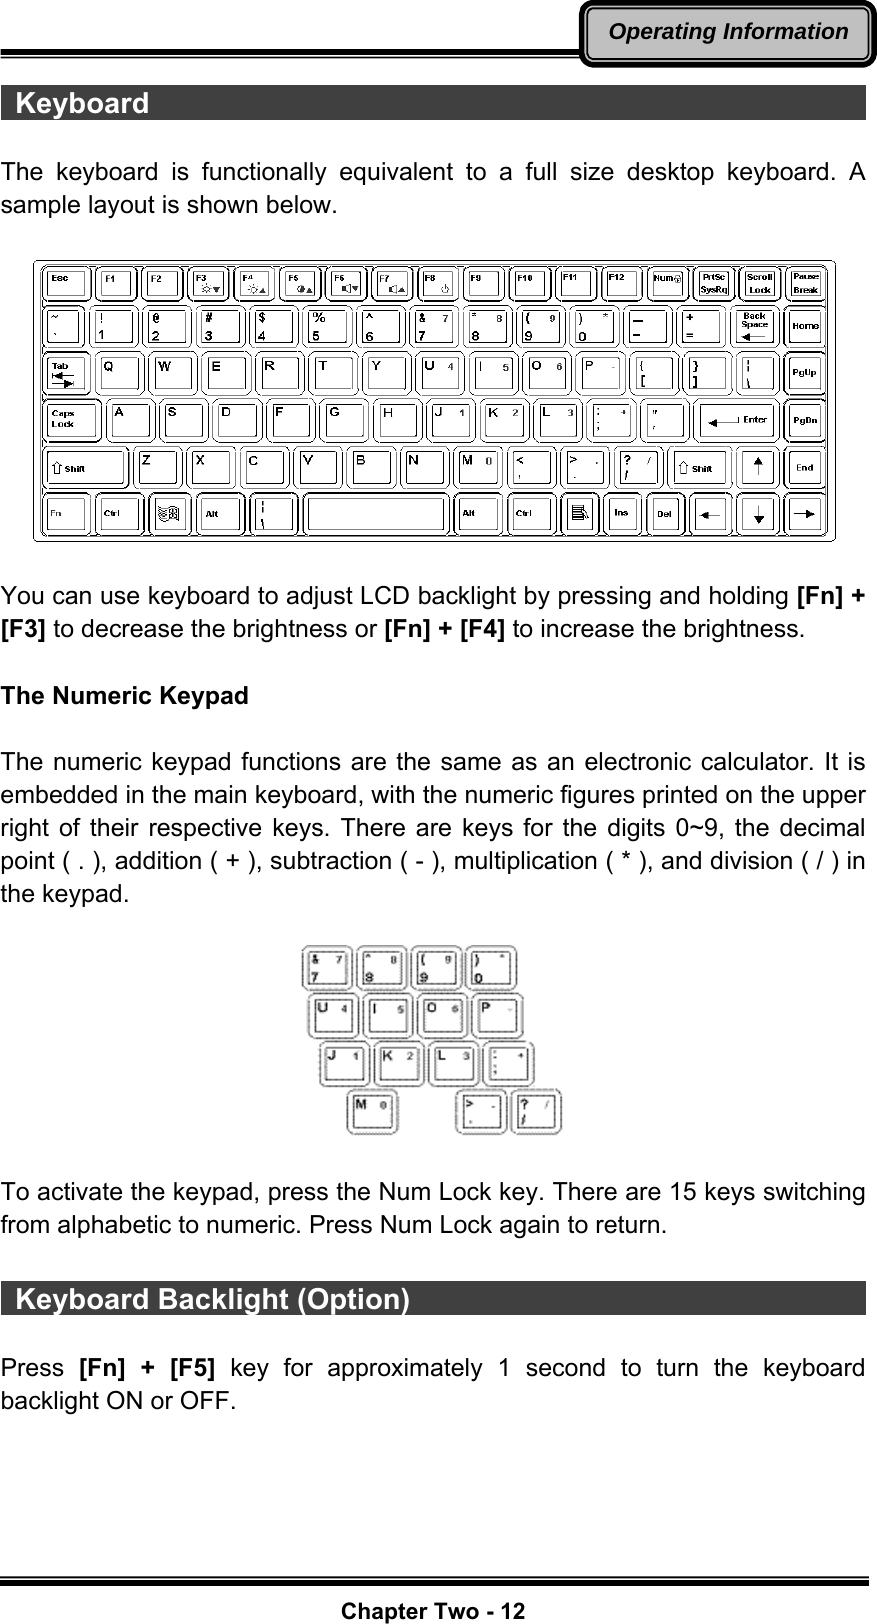   Chapter Two - 12Operating Information Keyboard                                                    The keyboard is functionally equivalent to a full size desktop keyboard. A sample layout is shown below.    You can use keyboard to adjust LCD backlight by pressing and holding [Fn] + [F3] to decrease the brightness or [Fn] + [F4] to increase the brightness.  The Numeric Keypad  The numeric keypad functions are the same as an electronic calculator. It is embedded in the main keyboard, with the numeric figures printed on the upper right of their respective keys. There are keys for the digits 0~9, the decimal point ( . ), addition ( + ), subtraction ( - ), multiplication ( * ), and division ( / ) in the keypad.    To activate the keypad, press the Num Lock key. There are 15 keys switching from alphabetic to numeric. Press Num Lock again to return.   Keyboard Backlight (Option)                                         Press  [Fn] + [F5] key for approximately 1 second to turn the keyboard backlight ON or OFF.  